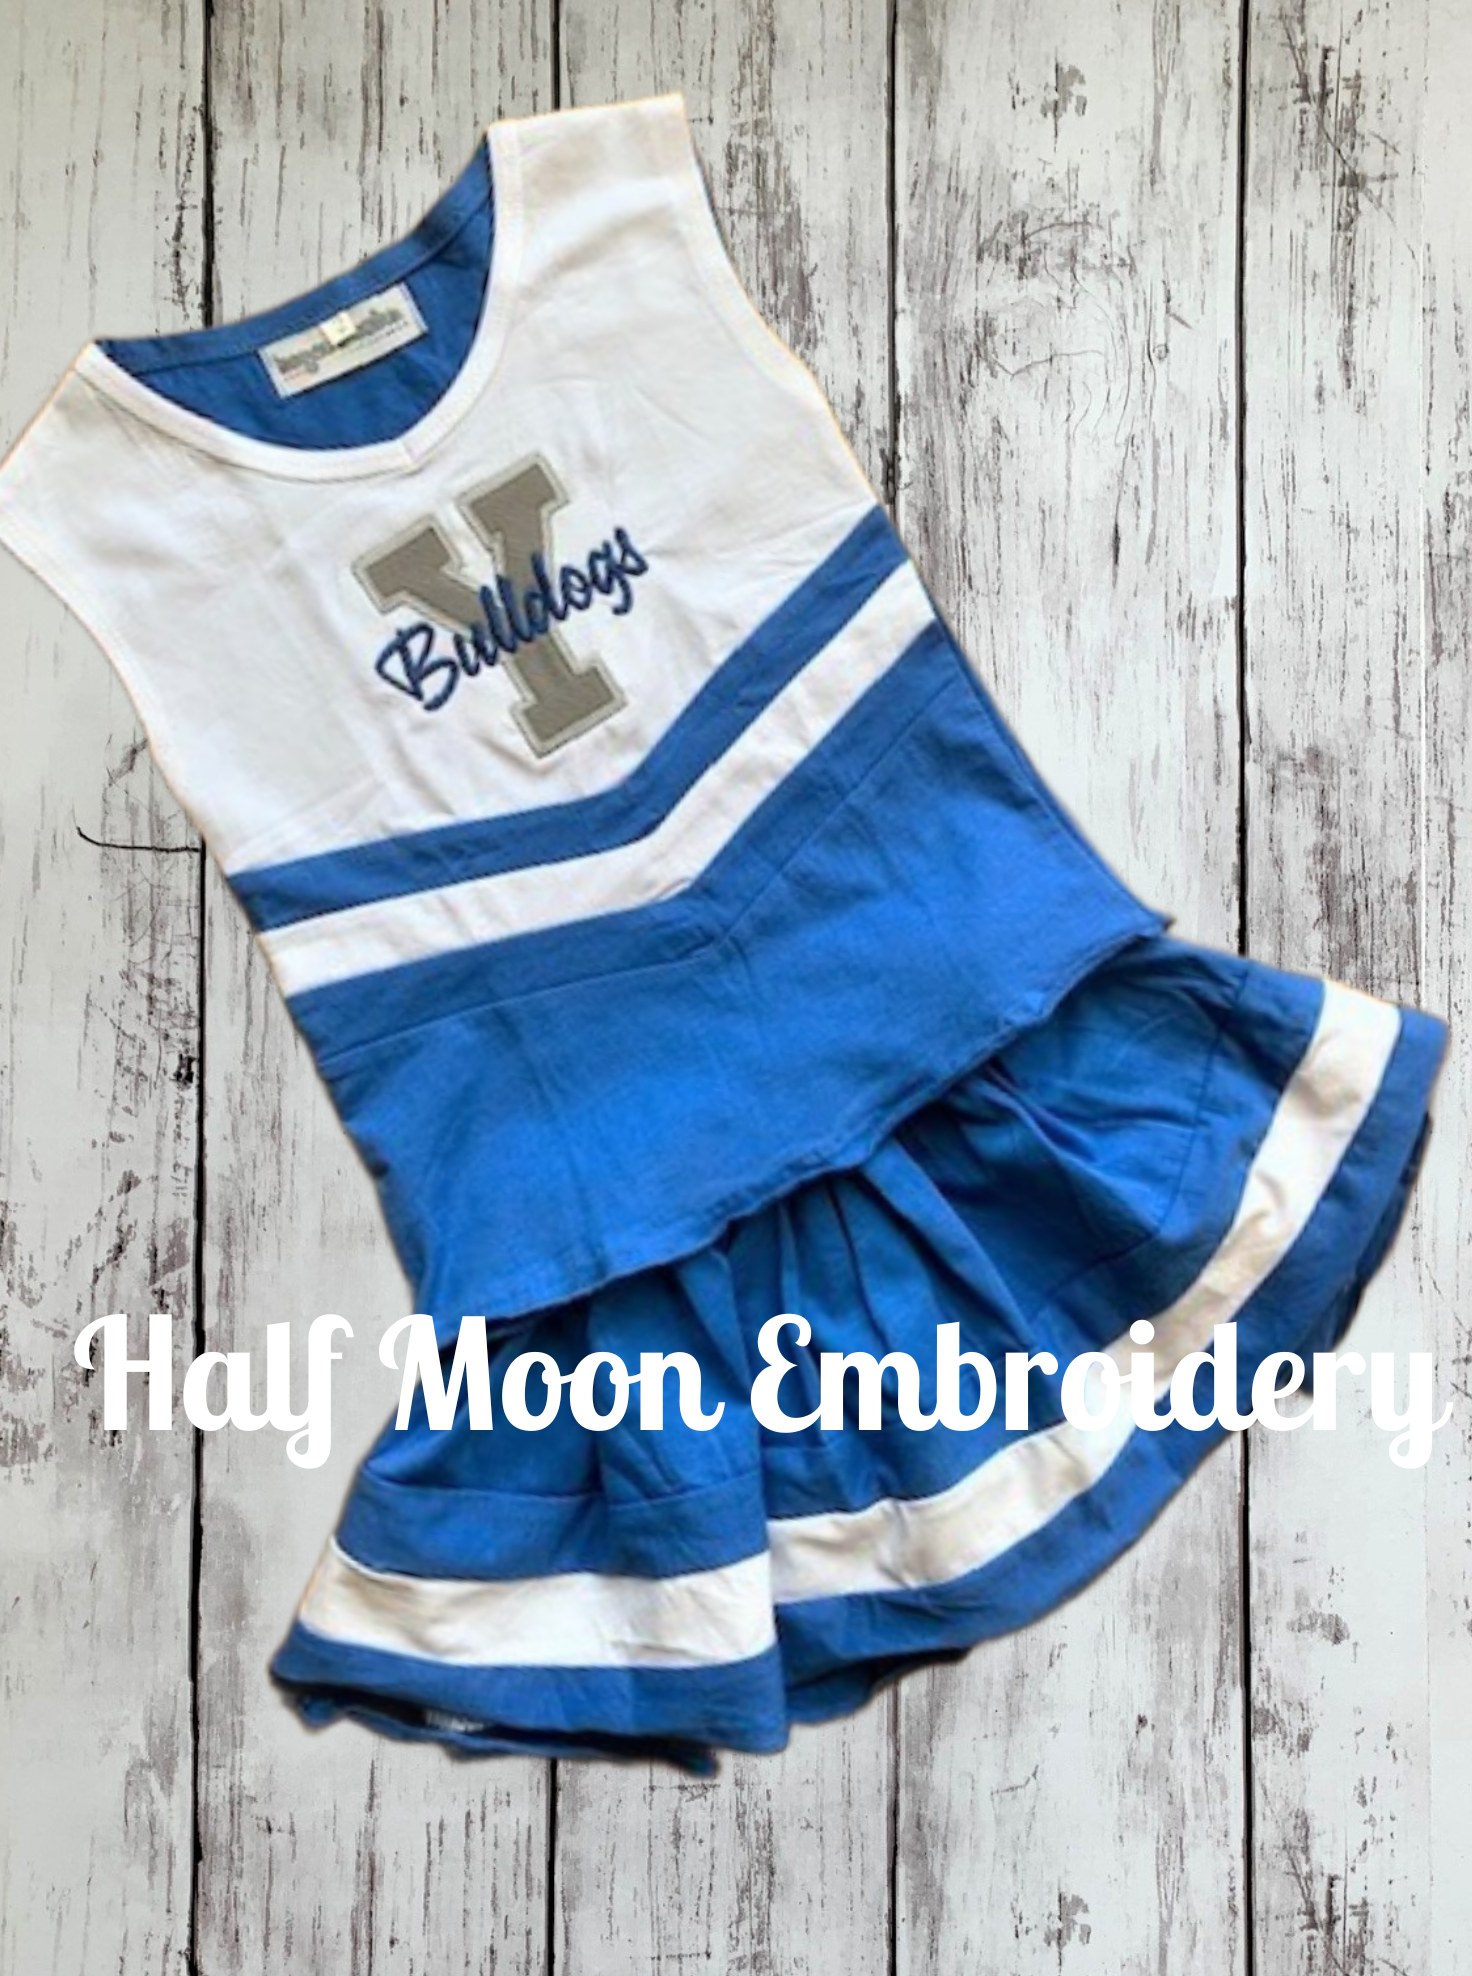 Half Moon Embroidery - Personalized Blue, Gold and White Cheer Uniform